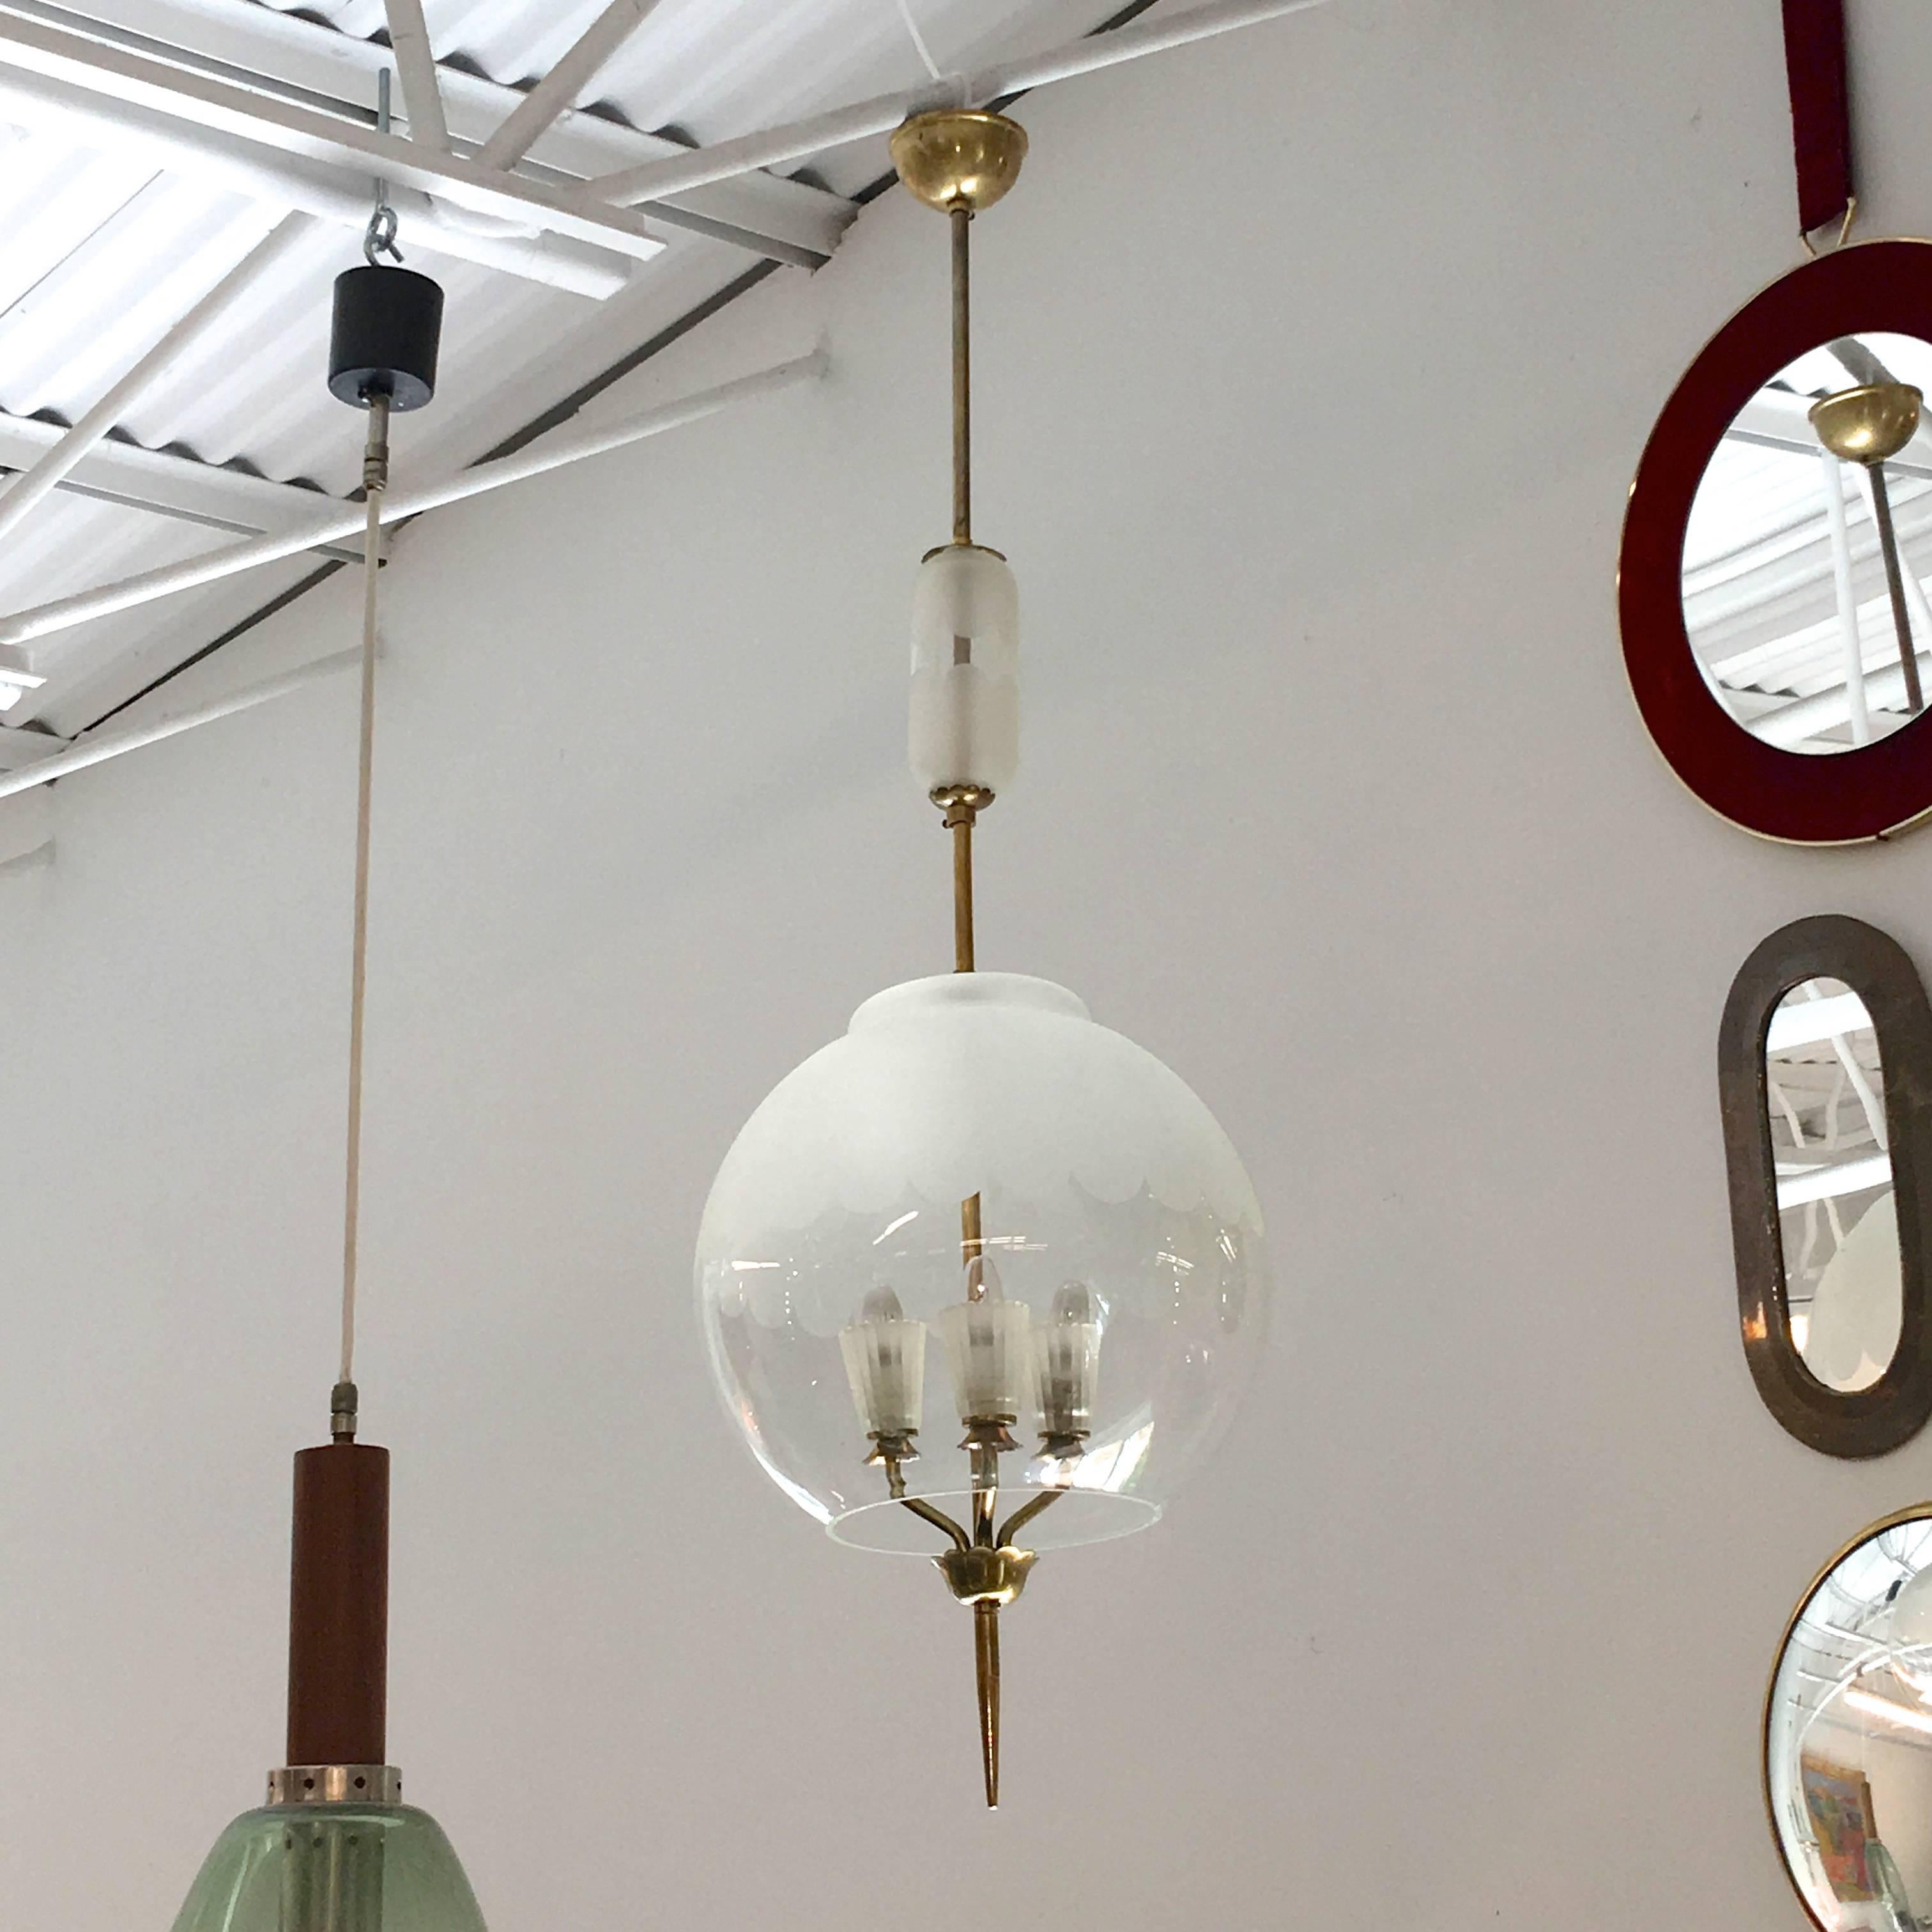 1940s Italian pendant in the manner of Pietro Chiesa for Fontana Arte. A round glass orb with frosted design on upper hemisphere, seemingly floats suspended over brass candle cluster with three lights in frosted glass cups, embellished by a tapered